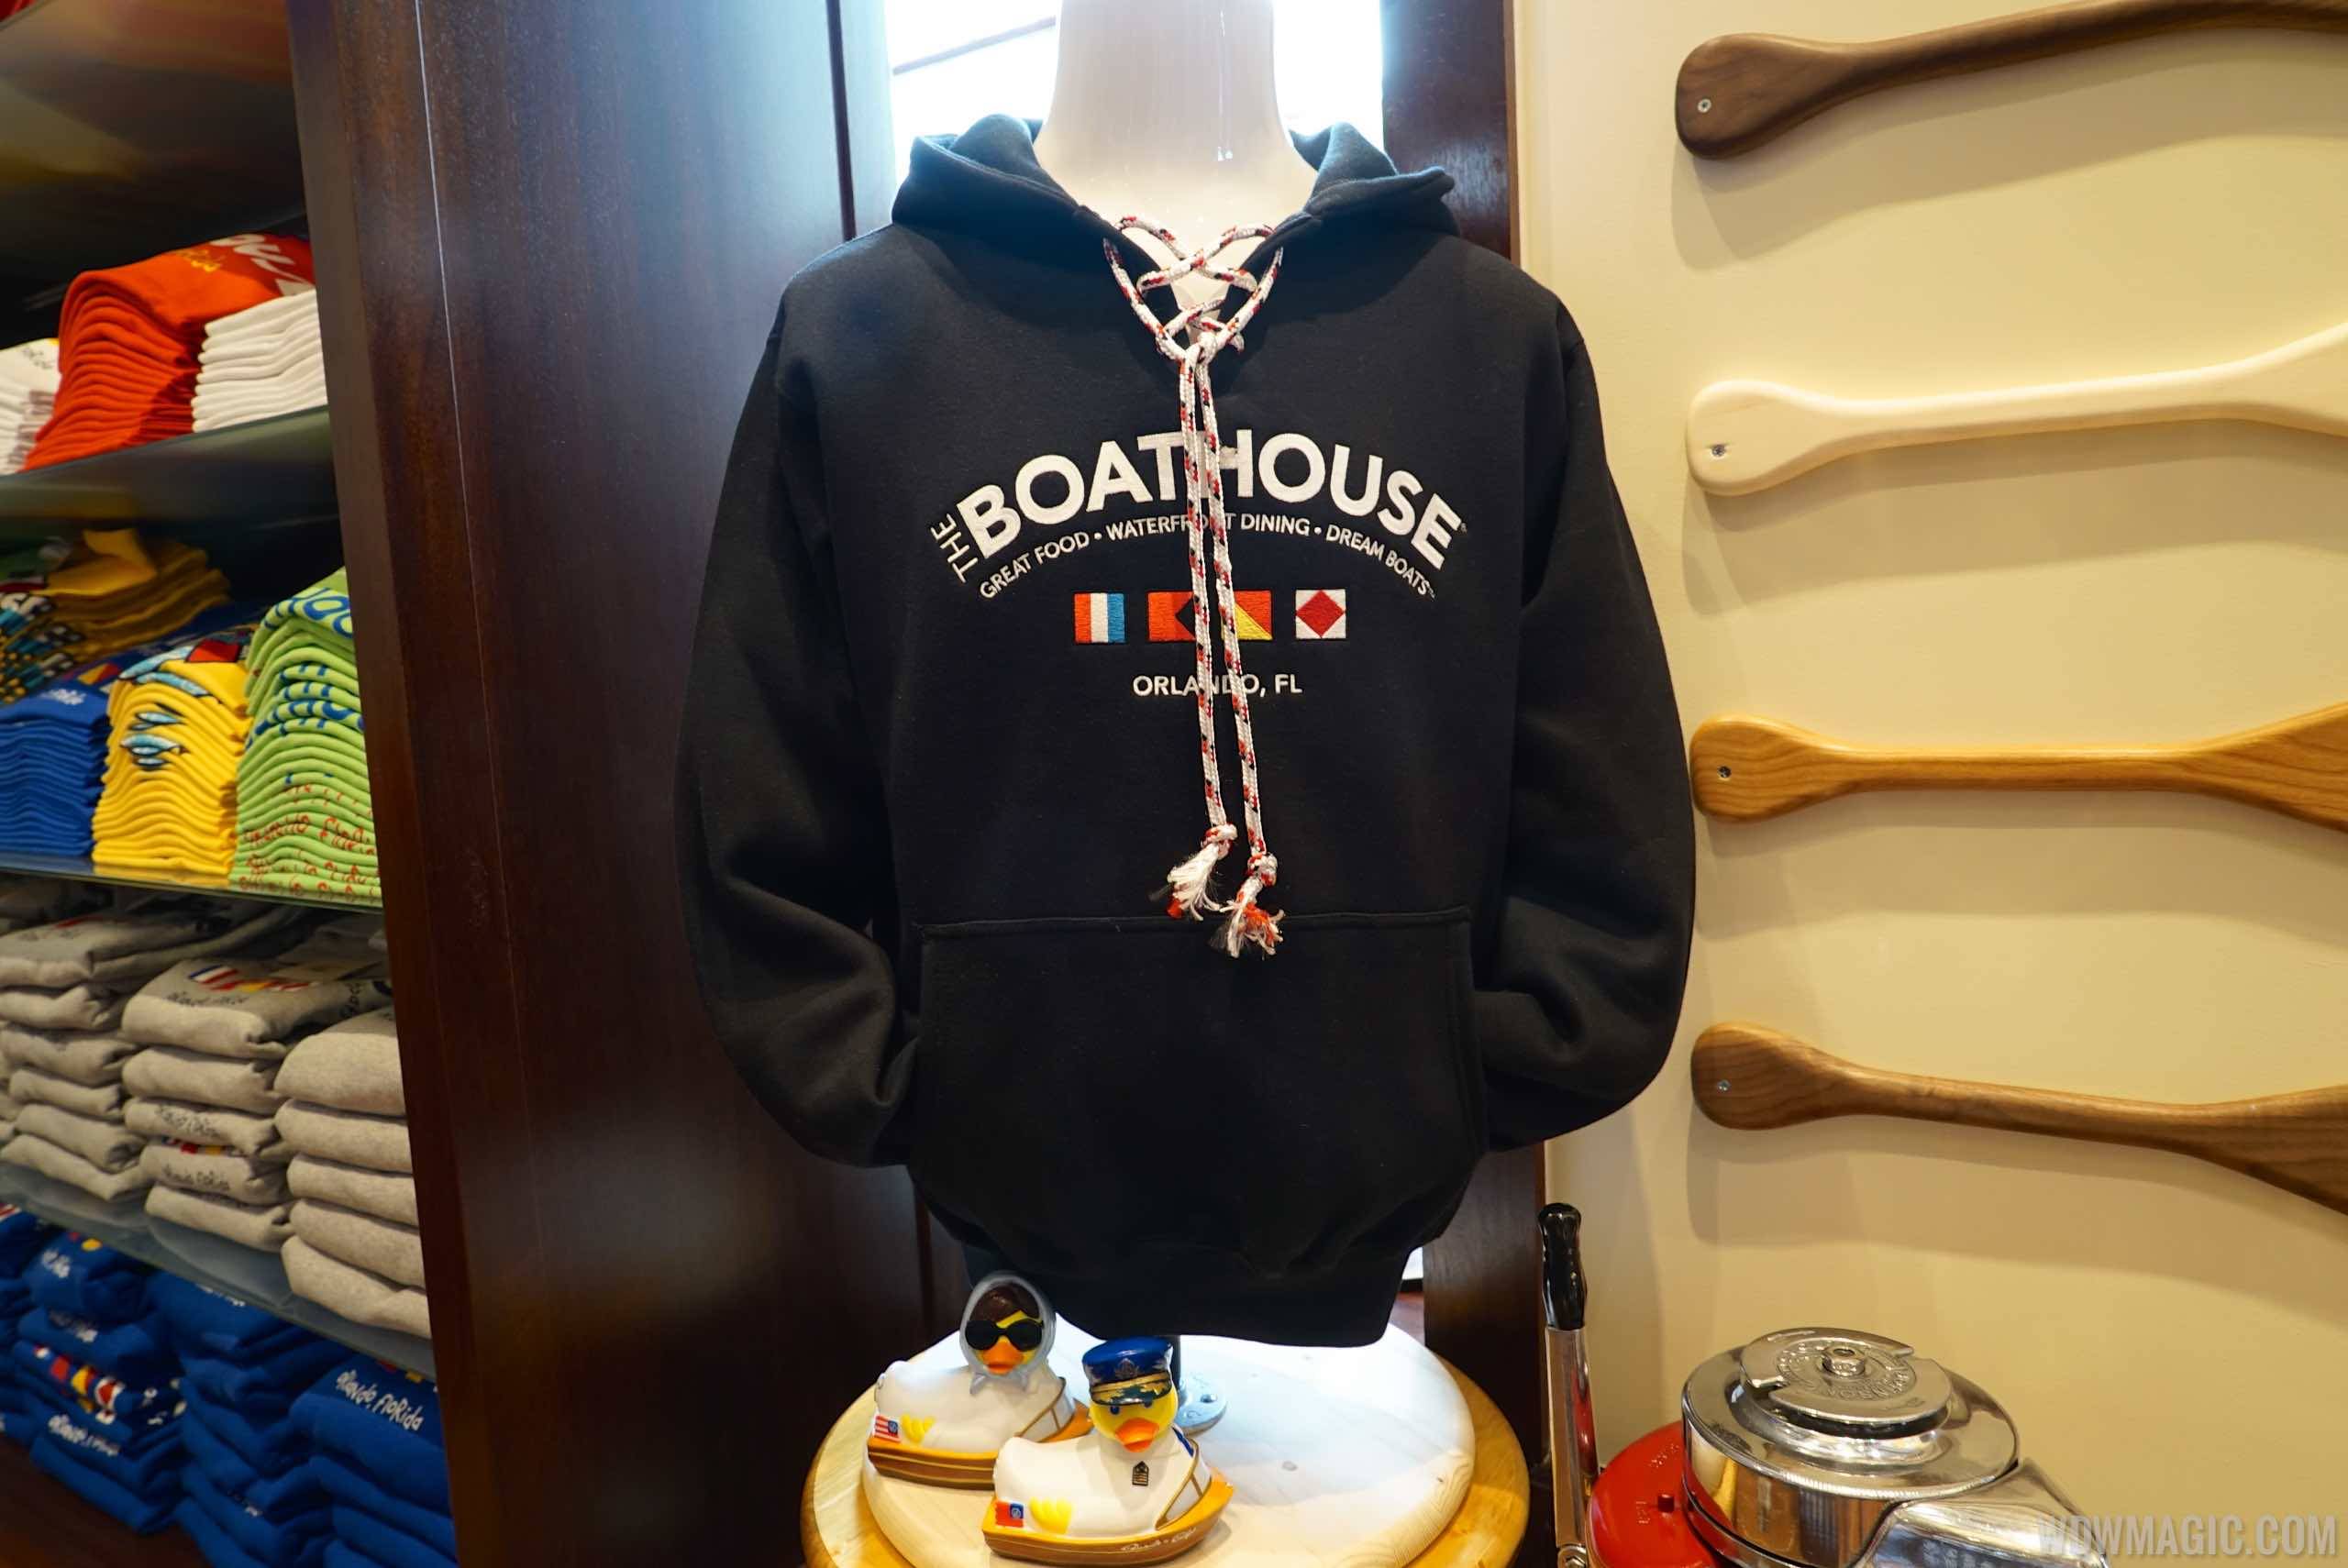 The BOATHOUSE - Gift shop